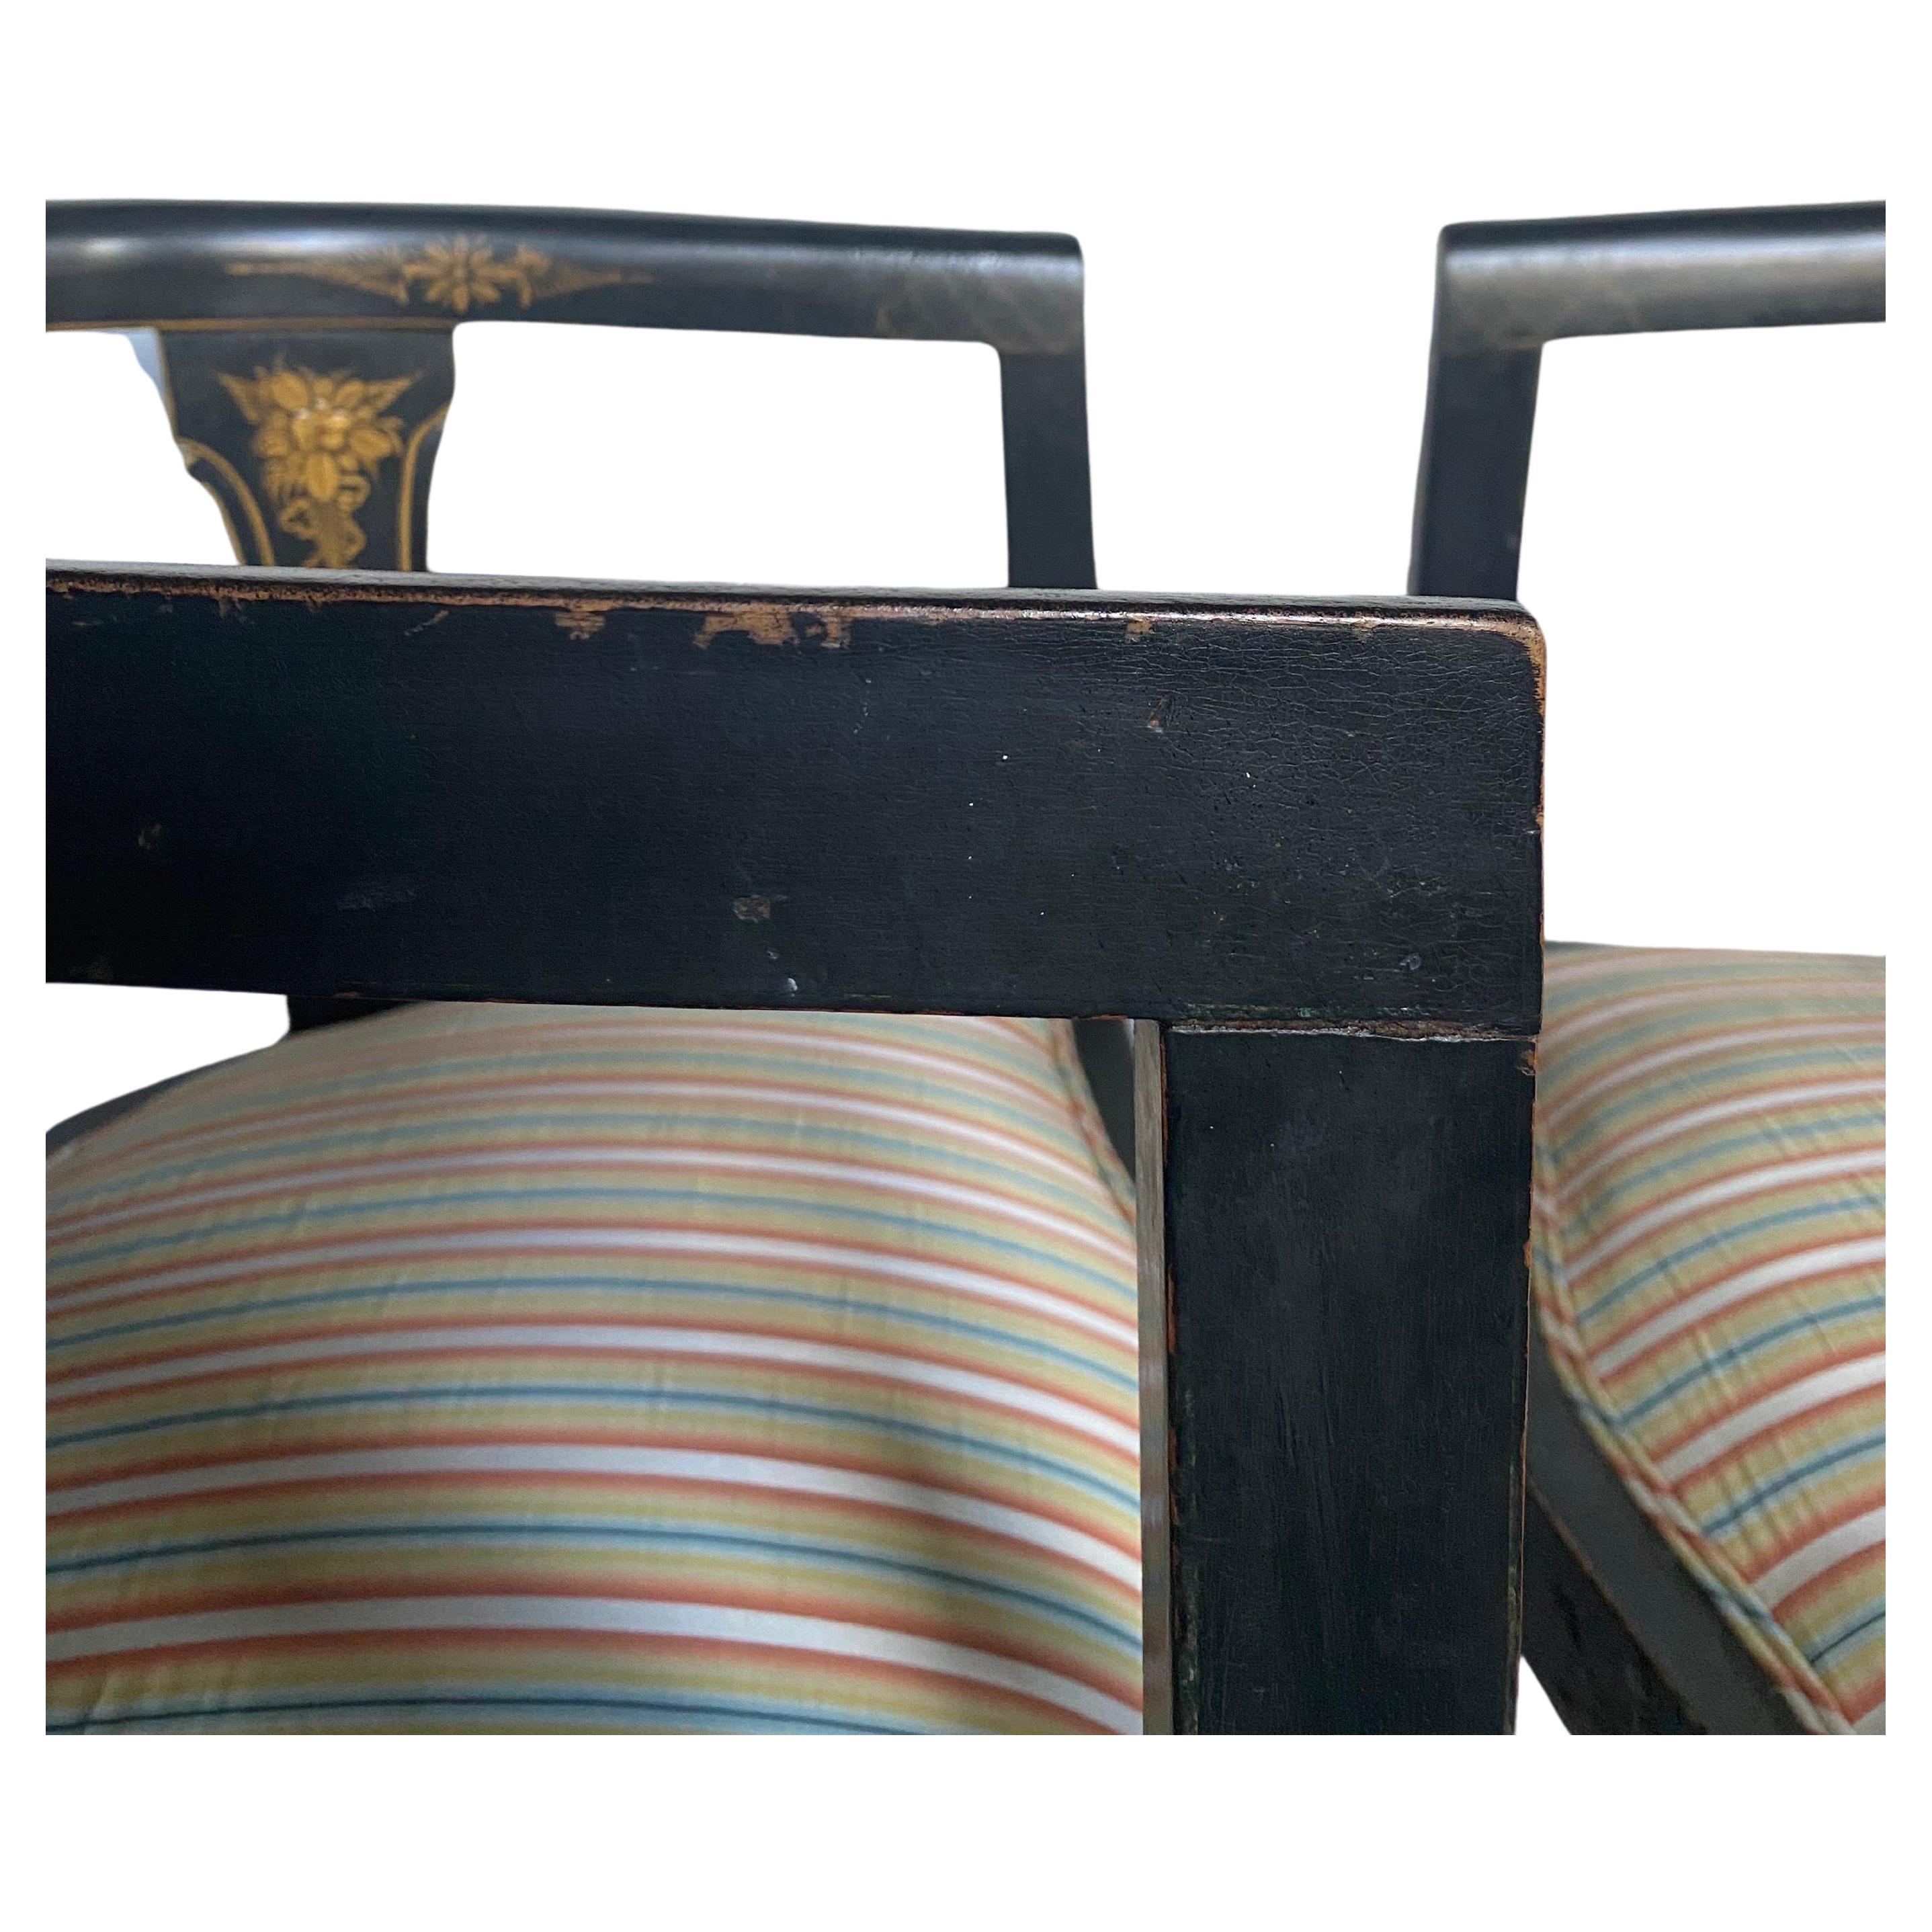 Chinoiserie Ebonized Gilt Accent Clawfoot Tub Armchairs, Pair  For Sale 8